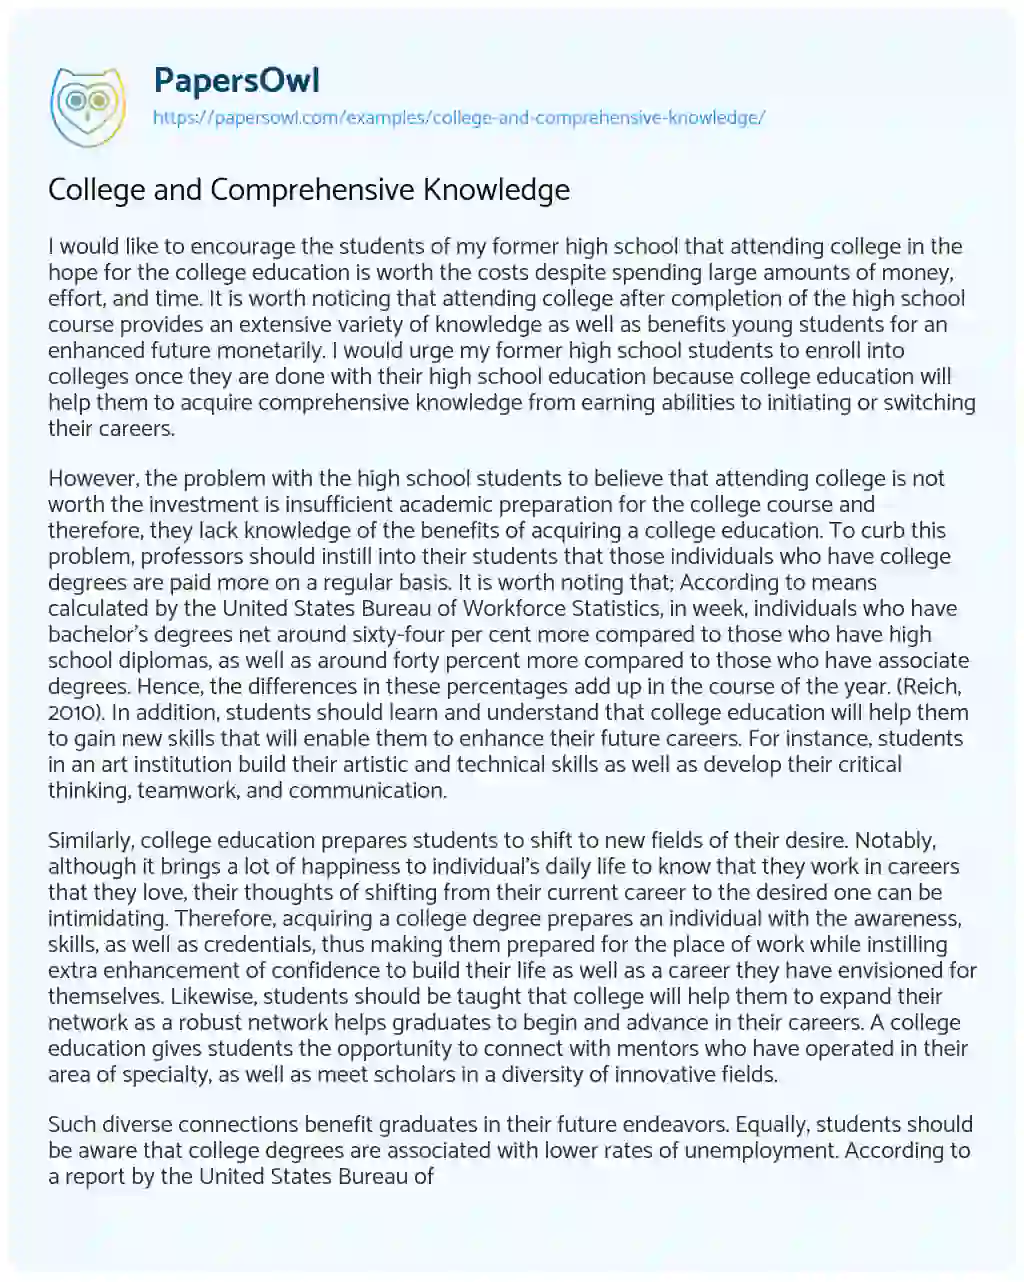 Essay on College and Comprehensive Knowledge